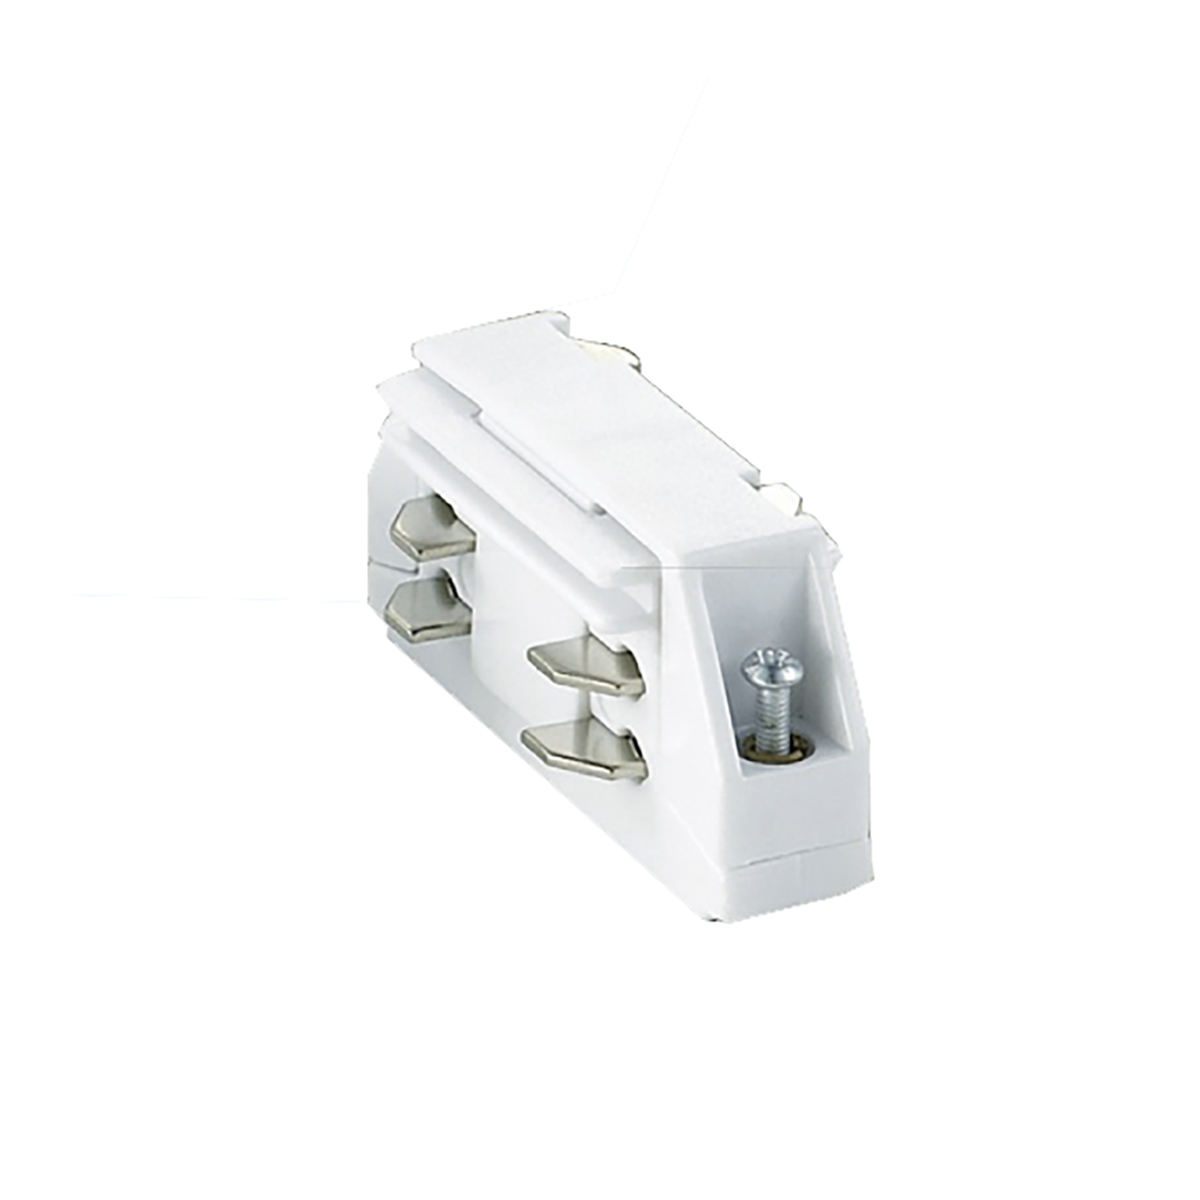 In-line connector for 2 track rails